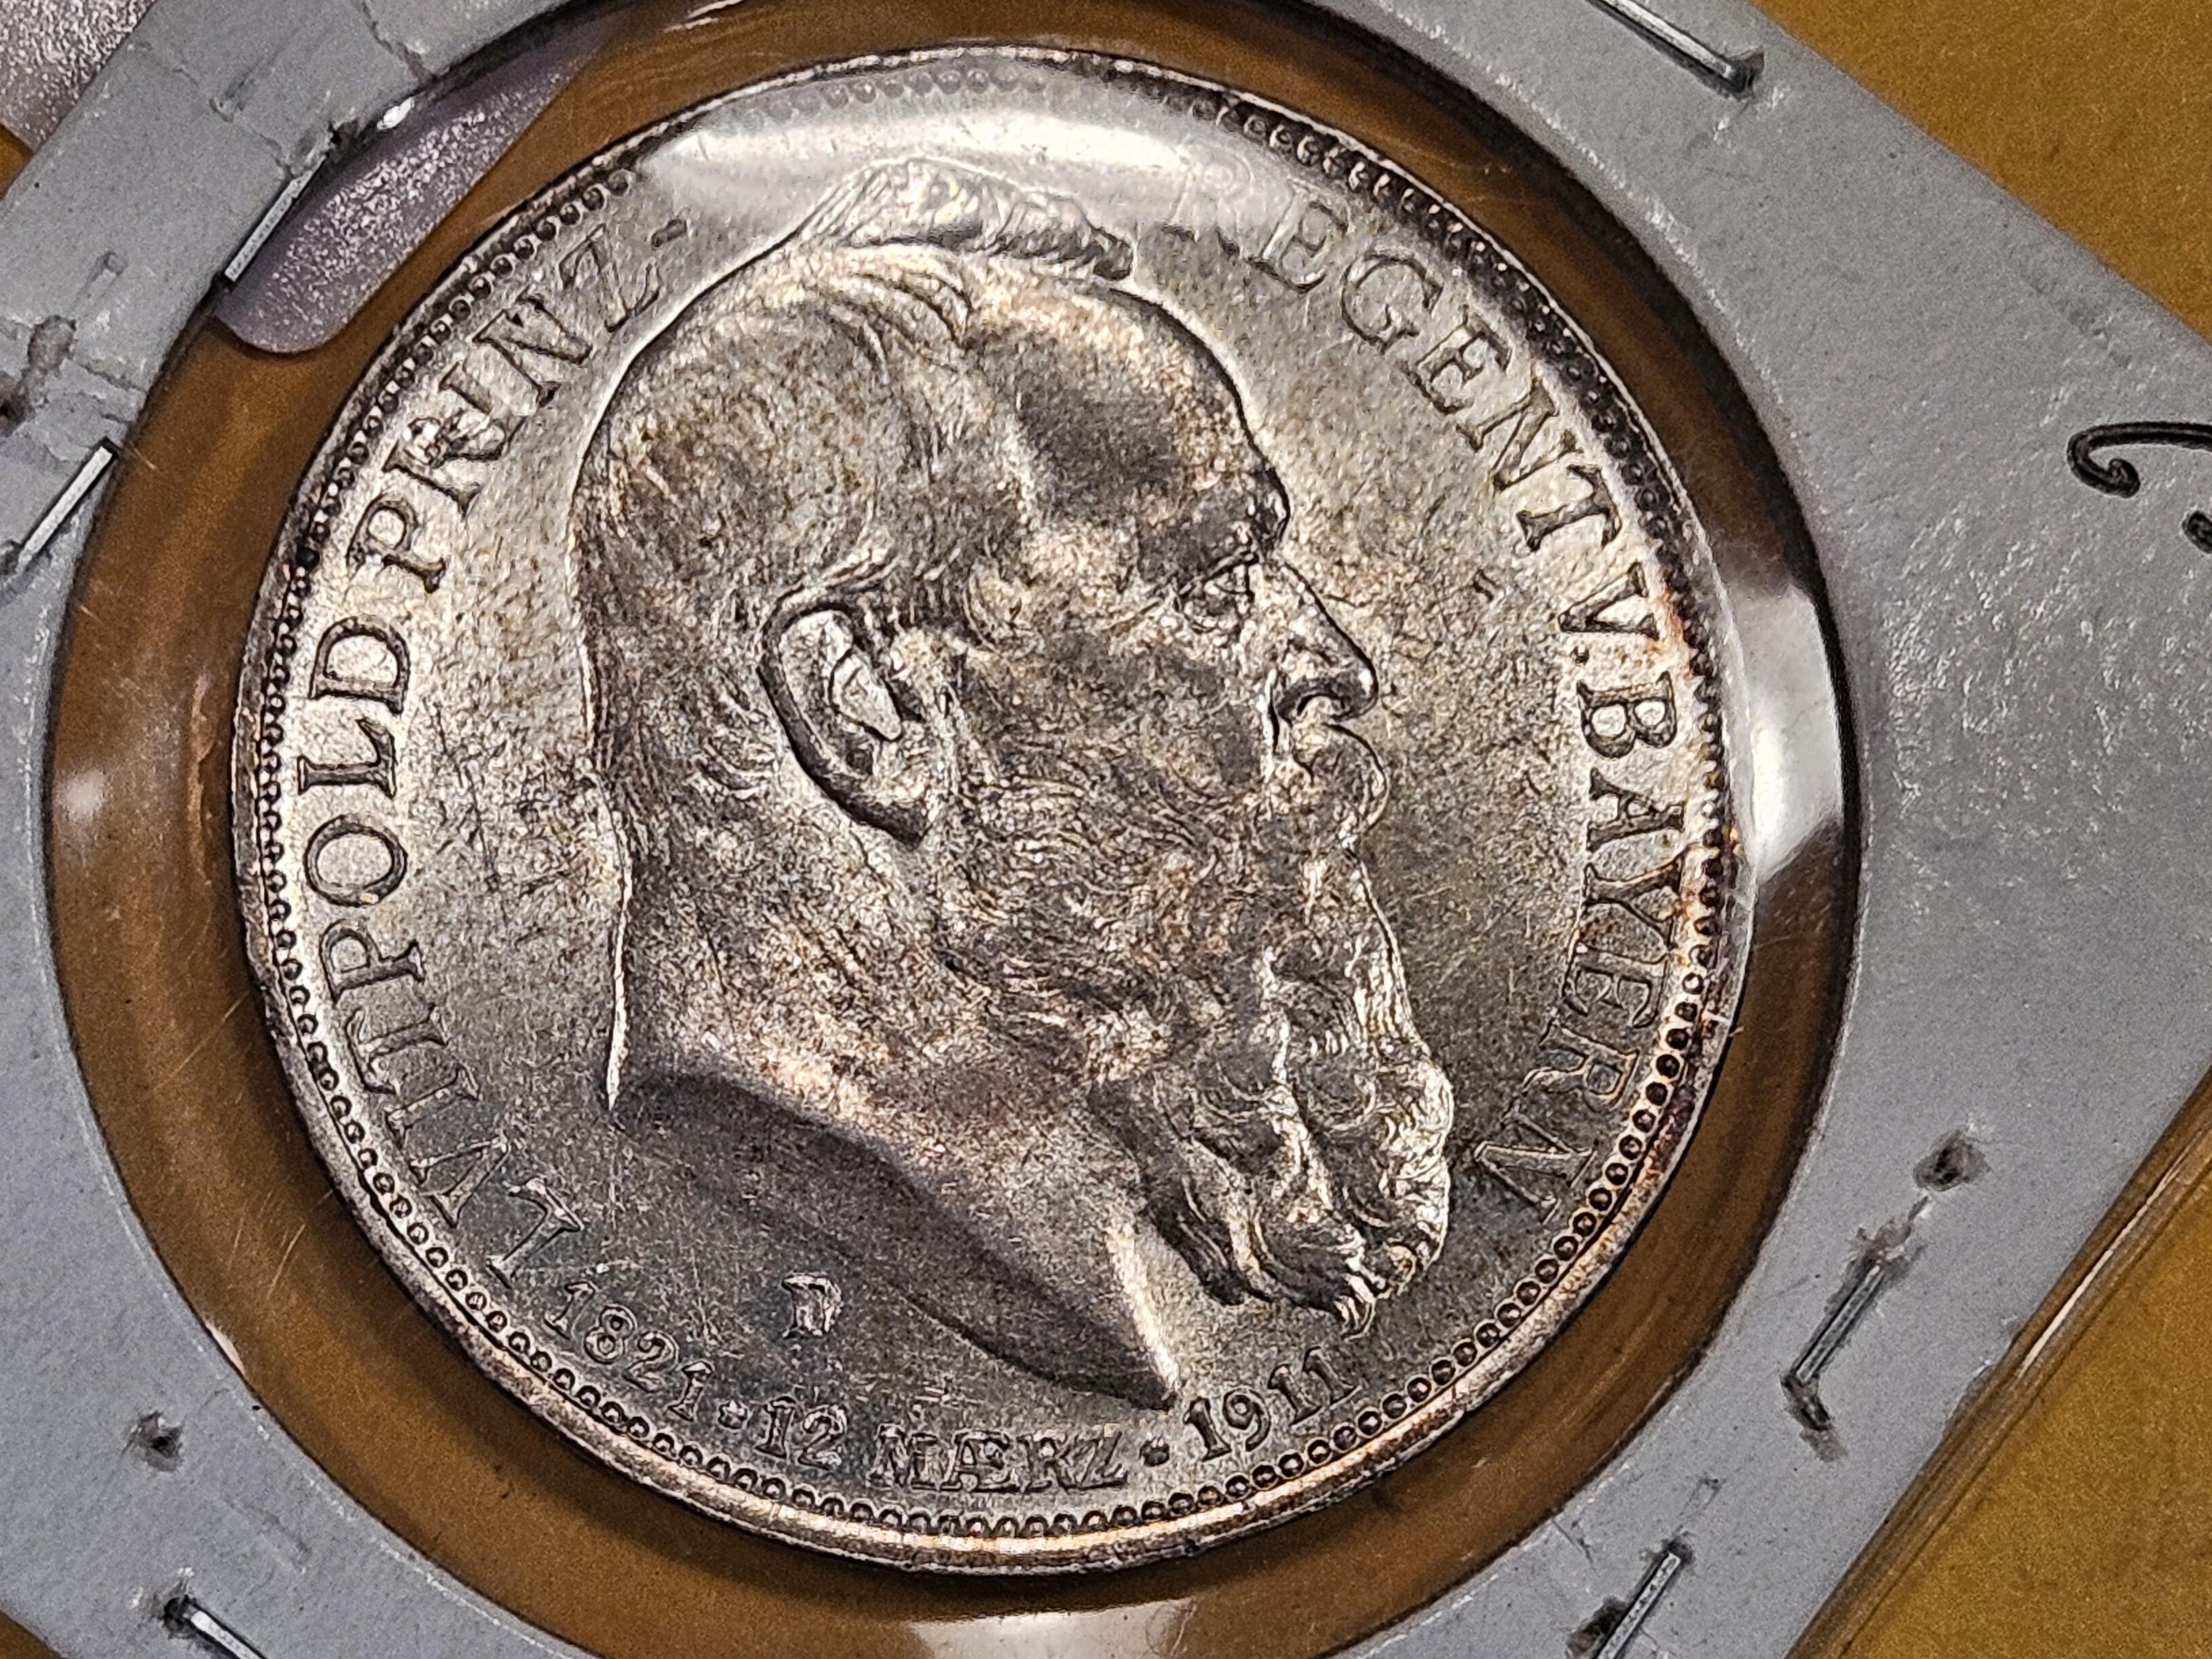 Brilliant Uncirculated 1911-D German States Bavaria silver 3 marks